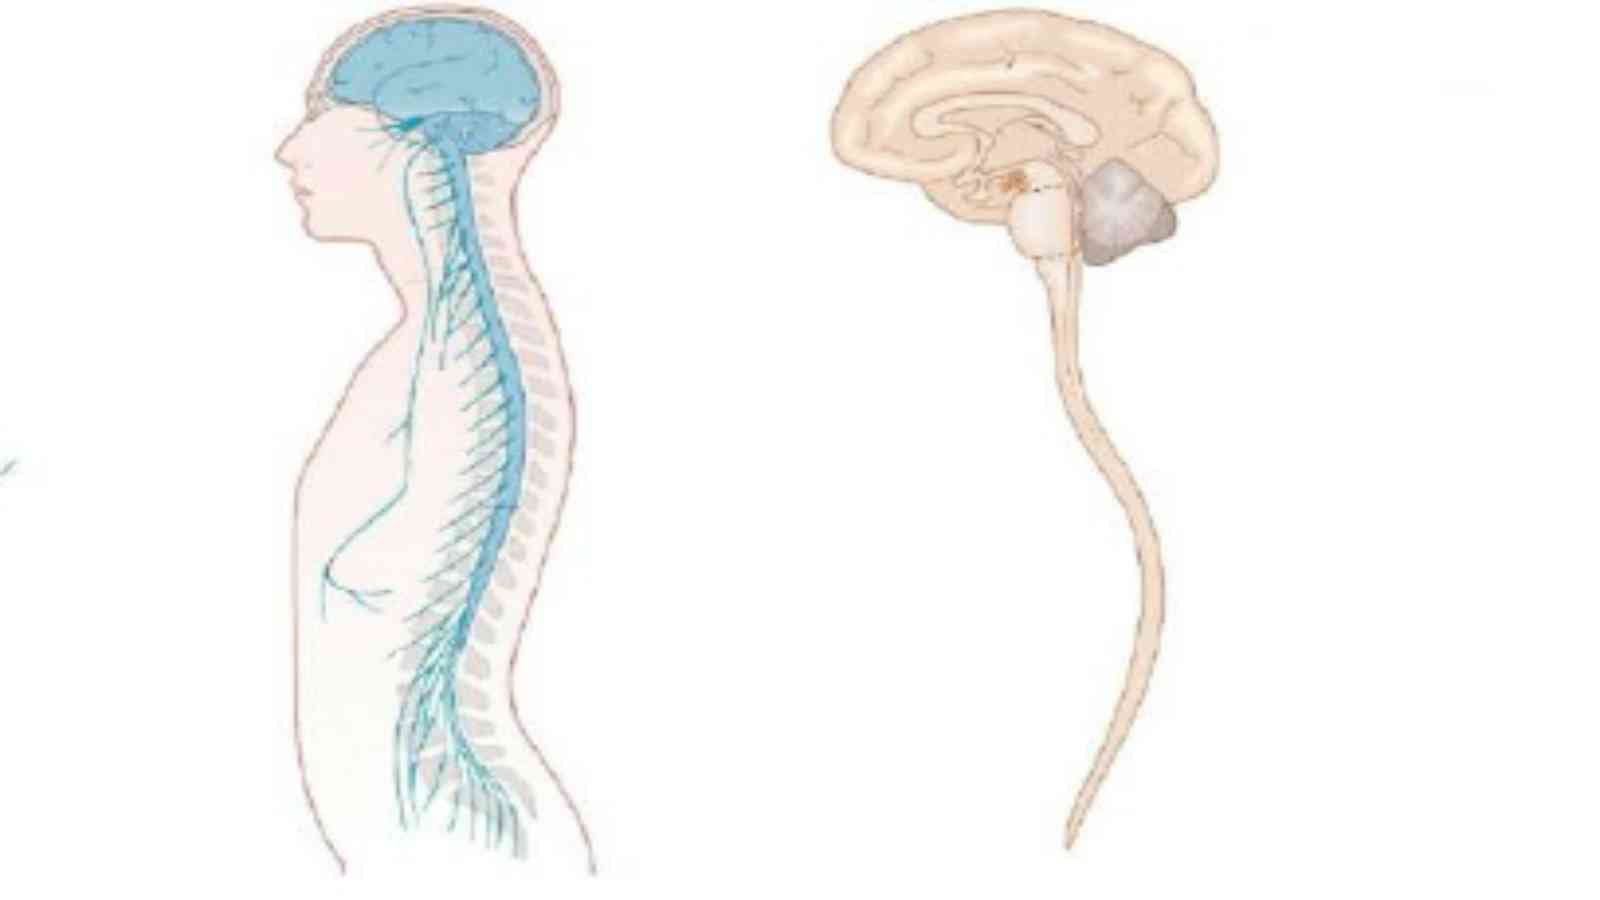 Difference Between Brain and Spinal Cord